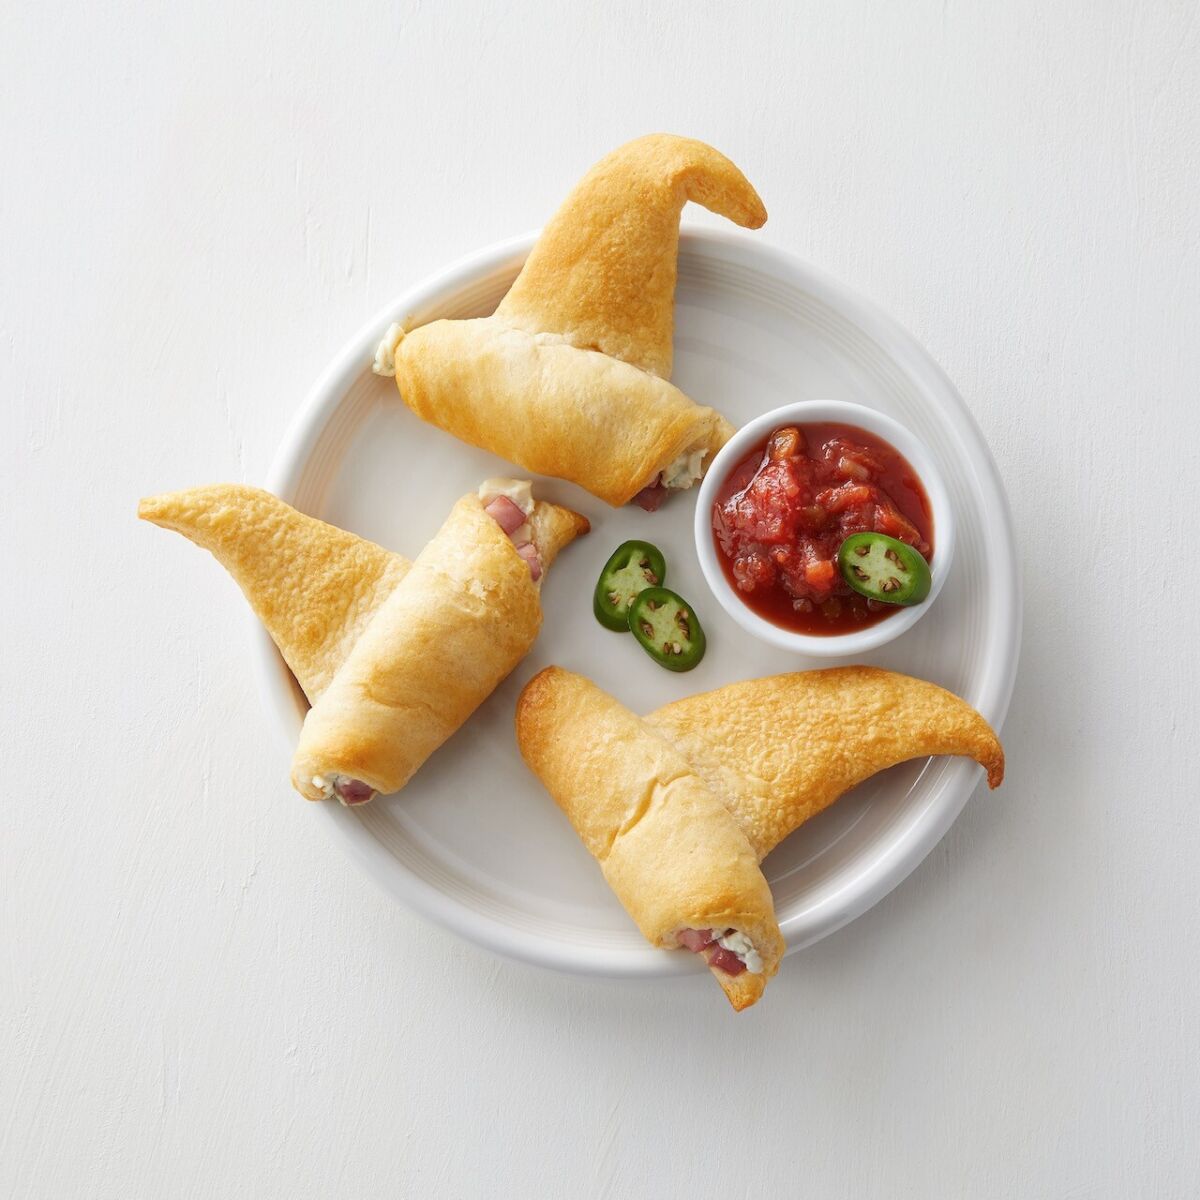 Witch "hats" made of crescent rolls, ham and cream cheese.